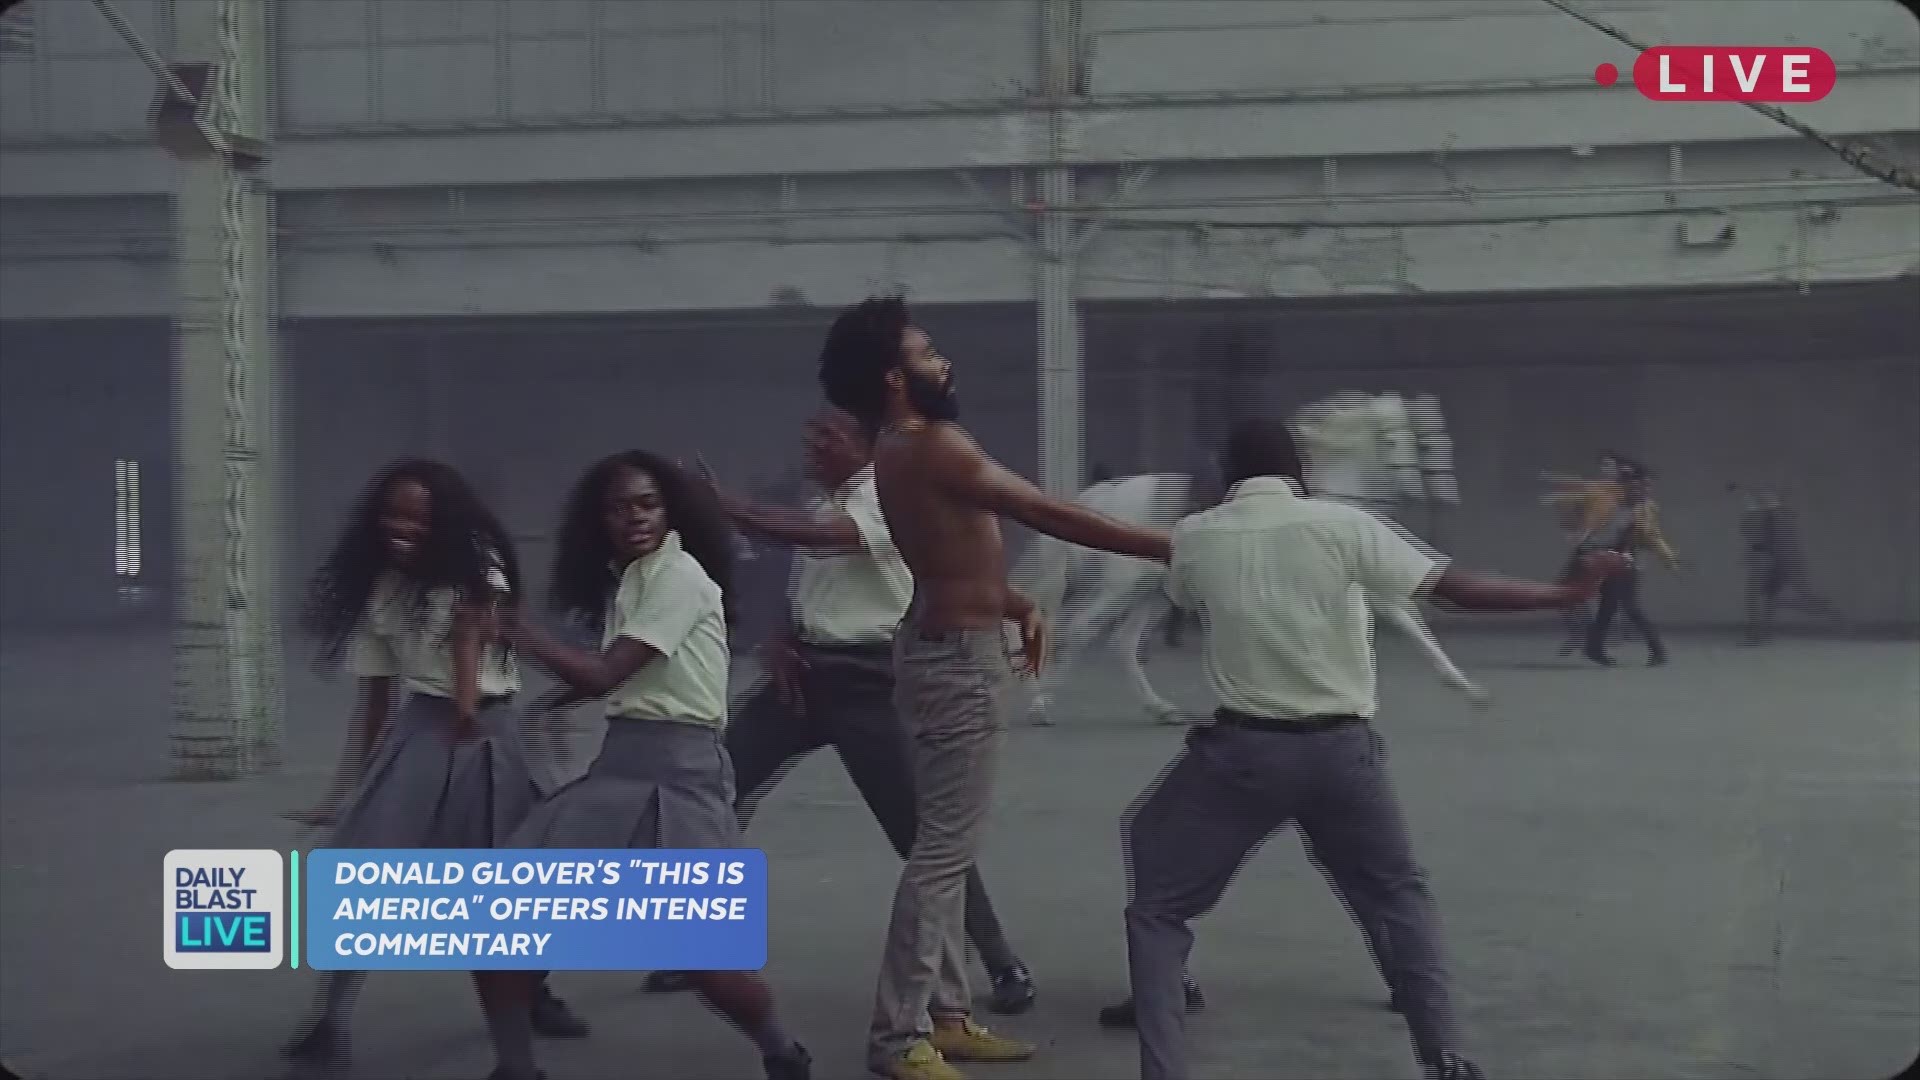 Donald Glover, a.k.a "Childish Gambino" is dominating the industry after dropping an intense new music video for his song "This is America." With commentary on gun violence, police brutality, black culture, and social media...this video is a lot to unpack